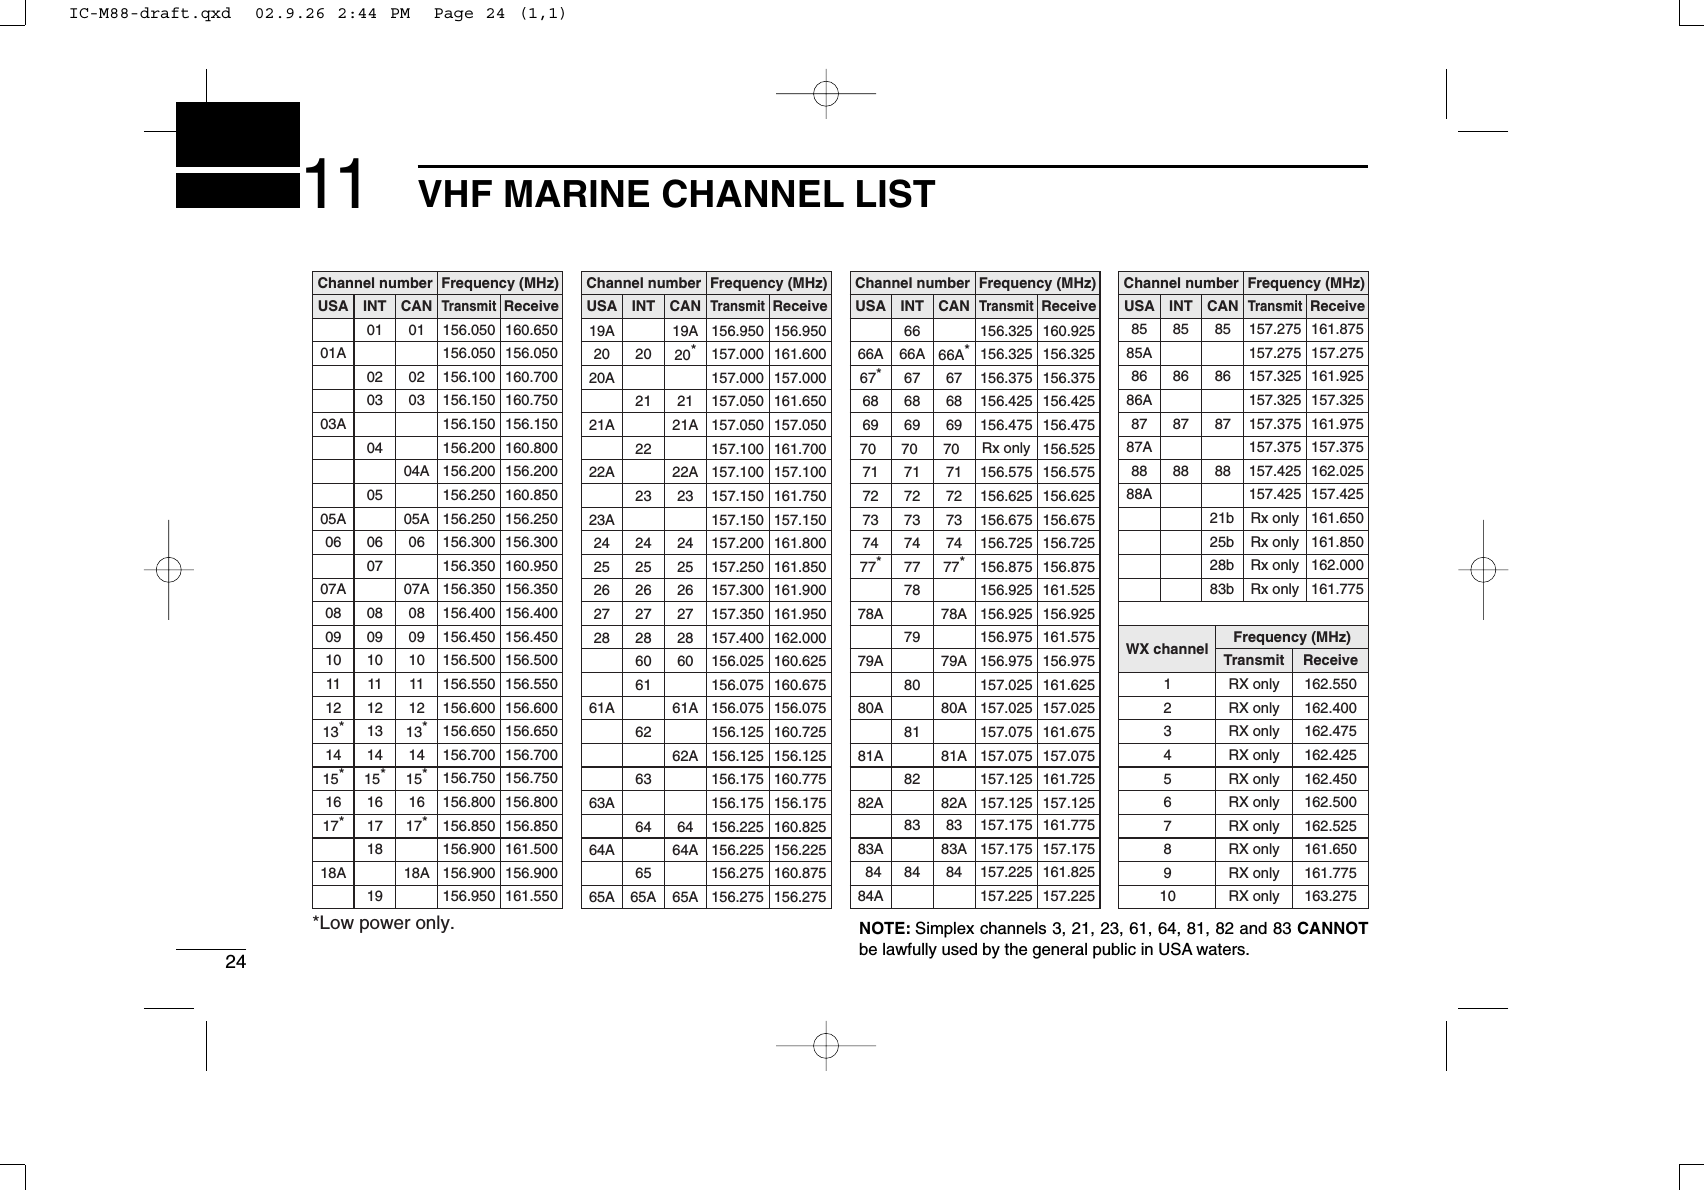 24VHF MARINE CHANNEL LISTChannel numberUSA CANTransmitReceiveFrequency (MHz)INTChannel number Frequency (MHz)USA CANTransmitReceiveINTChannel number Frequency (MHz)USA CANTransmitReceiveINTChannel number Frequency (MHz)USA CANTransmitReceiveINTWX channel Frequency (MHz)Transmit Receive01 156.050 160.65001A 156.050 156.05002 156.100 160.70003 156.150 160.75003A 156.150 156.150156.200 160.80004A 156.200 156.200156.250 160.85005A 05A 156.250 156.25006 06 156.300 156.300156.350 160.95007A 07A 156.350 156.35008 08 156.400 156.40009 09 156.450 156.45010 10 156.500 156.50011 11 156.550 156.55012 12 156.600 156.60013*13*156.650 156.65014 14 156.700 156.70015*15*156.750 156.75016 16 156.800 156.80017*17*156.850 156.850156.900 161.50018A 18A 156.900 156.900010203040506070809101112131415*161718156.950 161.55019A 19A 156.950 156.95020 20*157.000 161.60021 157.050 161.65021A 21A 157.050 157.050157.100 161.70022A 22A 157.100 157.10023 157.150 161.75023A 157.150 157.15024 24 157.200 161.80025 25 157.250 161.85026 26 157.300 161.90027 27 157.350 161.95028 28 157.400 162.00060 156.025 160.625156.075 160.67561A 61A 156.075 156.075156.125 160.72562A 156.125 156.125156.175 160.77563A 156.175 156.17564 156.225 160.82564A 64A 156.225 156.22519202122232425262728606162636420A 157.000 157.00066A 66A*156.325 160.92567*67 156.375 156.37568 68 156.425 156.42569 69 156.475 156.47570 70 156.52571 71 156.575 156.57572 72 156.625 156.62573 73 156.675 156.67574 74 156.725 156.72577*77*156.875 156.875156.925 161.52578A 78A 156.925 156.925156.975 161.57579A 79A 156.975 156.975157.025 161.62580A 80A 157.025 157.025157.075 161.67581A 81A 157.075 157.075157.125 161.72582A 82A 157.125 157.125666768697071727374777879808182156.325 156.32566A85 85 157.275 161.87585A 157.275 157.27586 86 157.325 161.92586A 157.325 157.32587 87 157.375 161.97587A 157.375 157.37588 88 157.425 162.02588A 157.425 157.4258586878821b Rx onlyRx only161.65025b Rx only 161.85028b Rx only 162.00083b Rx only 161.77541 RX only 162.5502 RX only 162.4003 RX only 162.4755 RX only 162.4506 RX only 162.5007 RX only 162.5258 RX only 161.6509 RX only 161.77510 RX only 163.275RX only 162.425156.275 160.87565A 65A 156.275 156.2756565A 84A83 157.175 161.77583A 83A 157.175 157.17584 84 157.225 161.8258384157.225 157.225*Low power only. NOTE: Simplex channels 3, 21, 23, 61, 64, 81, 82 and 83 CANNOTbe lawfully used by the general public in USA waters.11IC-M88-draft.qxd  02.9.26 2:44 PM  Page 24 (1,1)